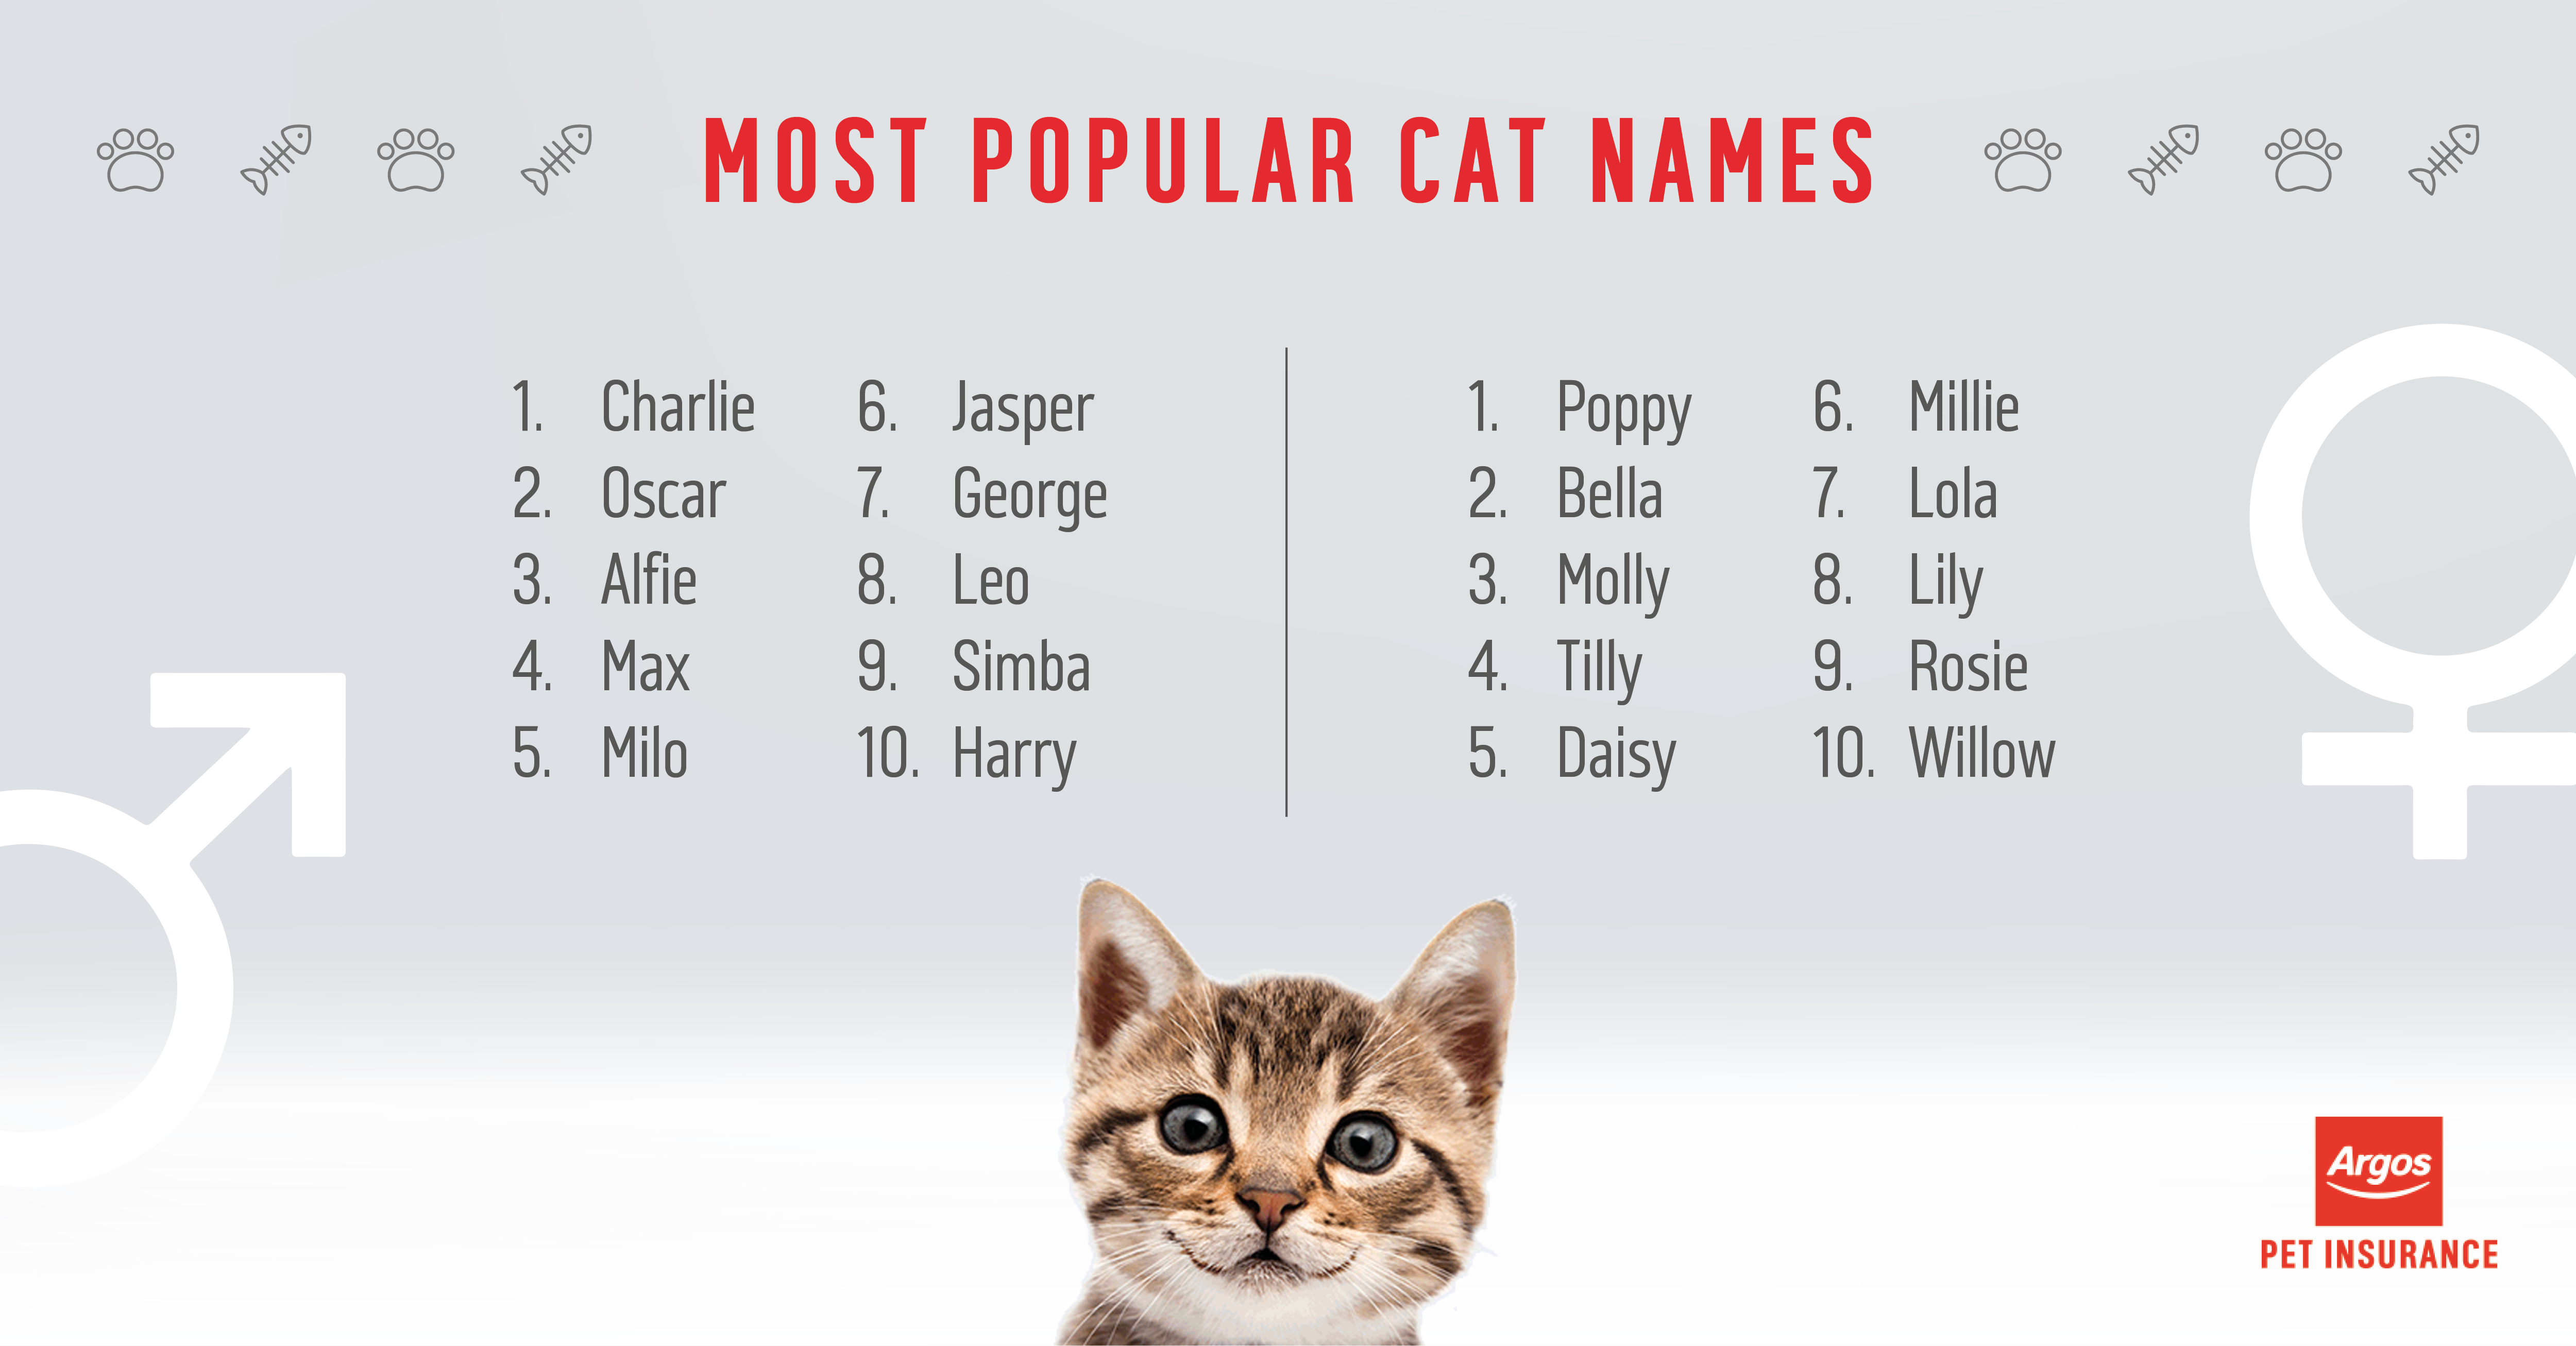 What are the most popular cat names - Argos Pet Insurance